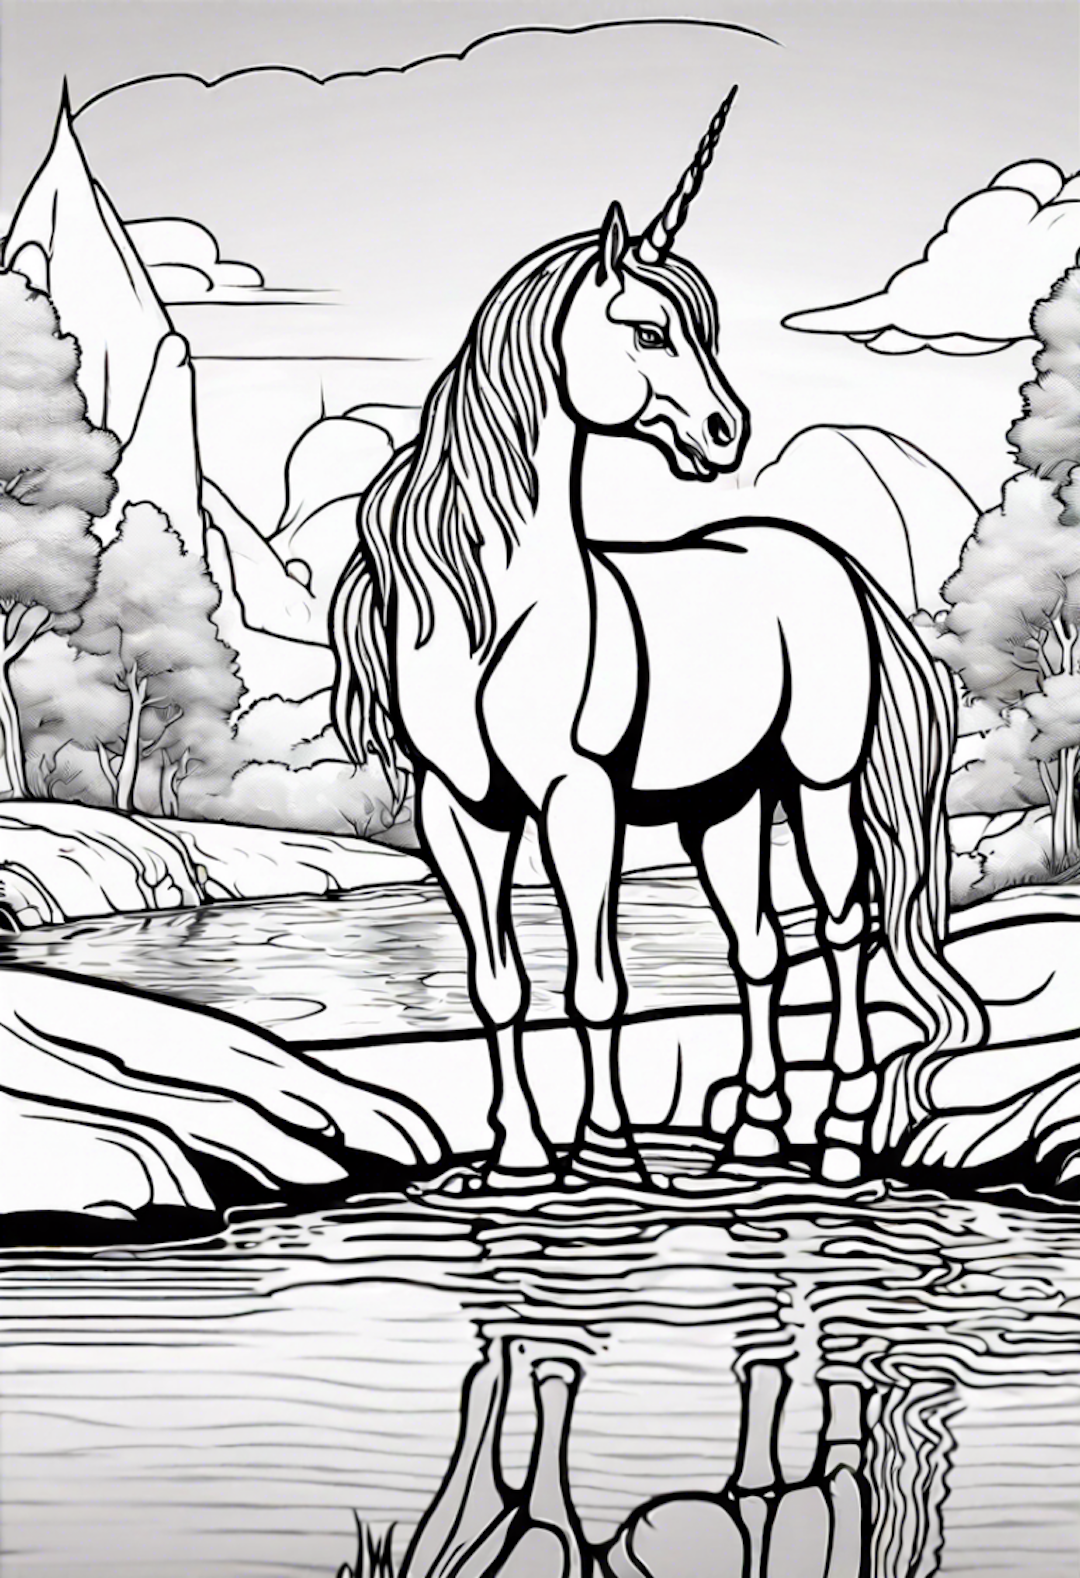 Unicorn by the Tranquil River coloring pages